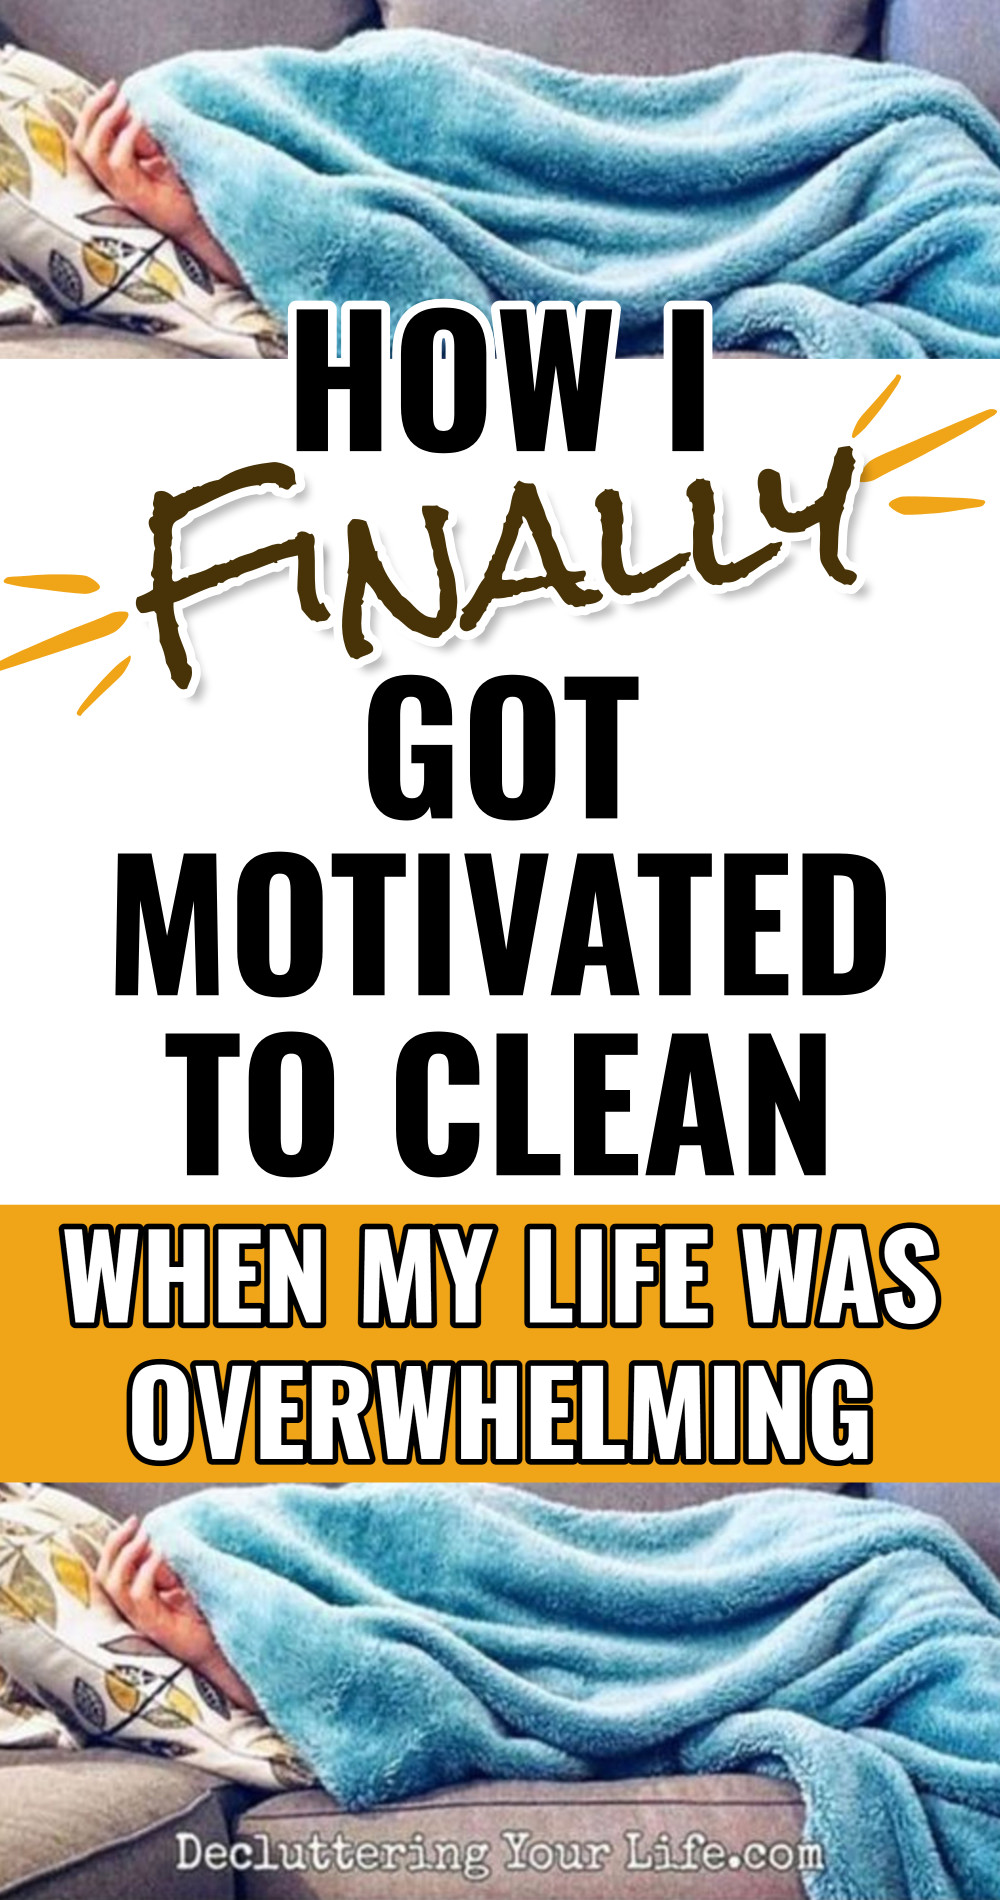 how I finally got motivated to clean when my life was overwhelming